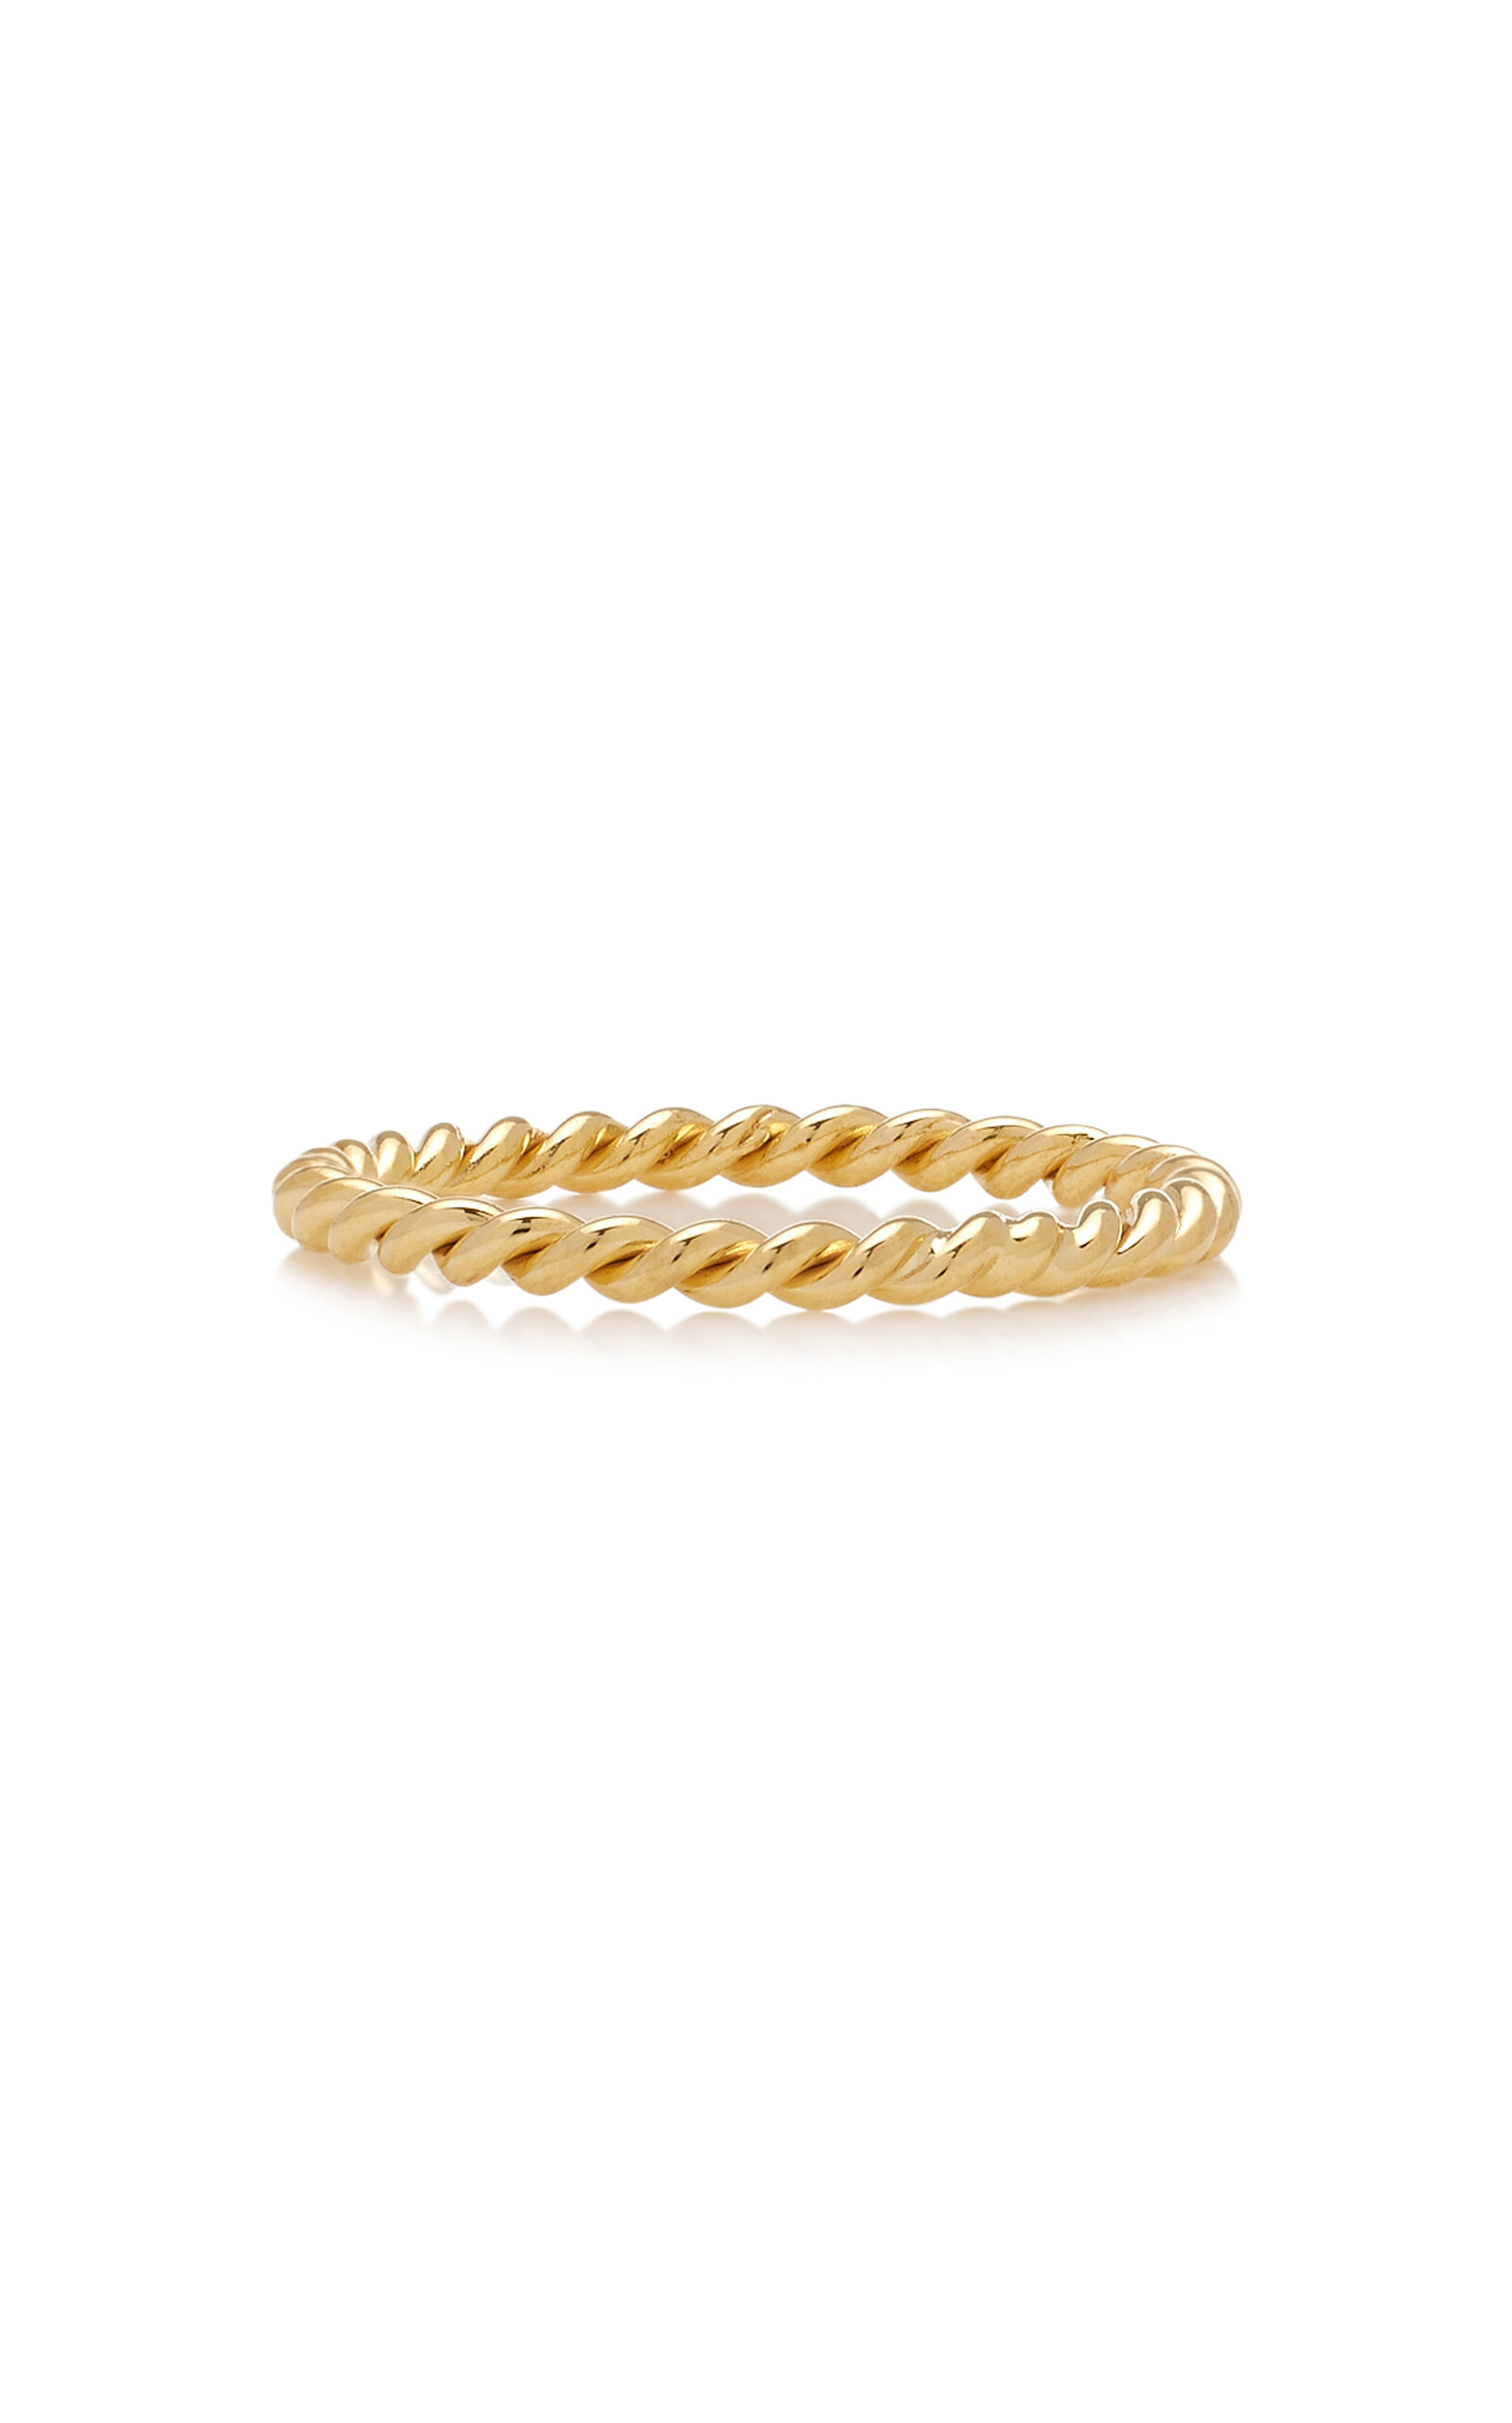 The Rope 18K Yellow Gold Ring